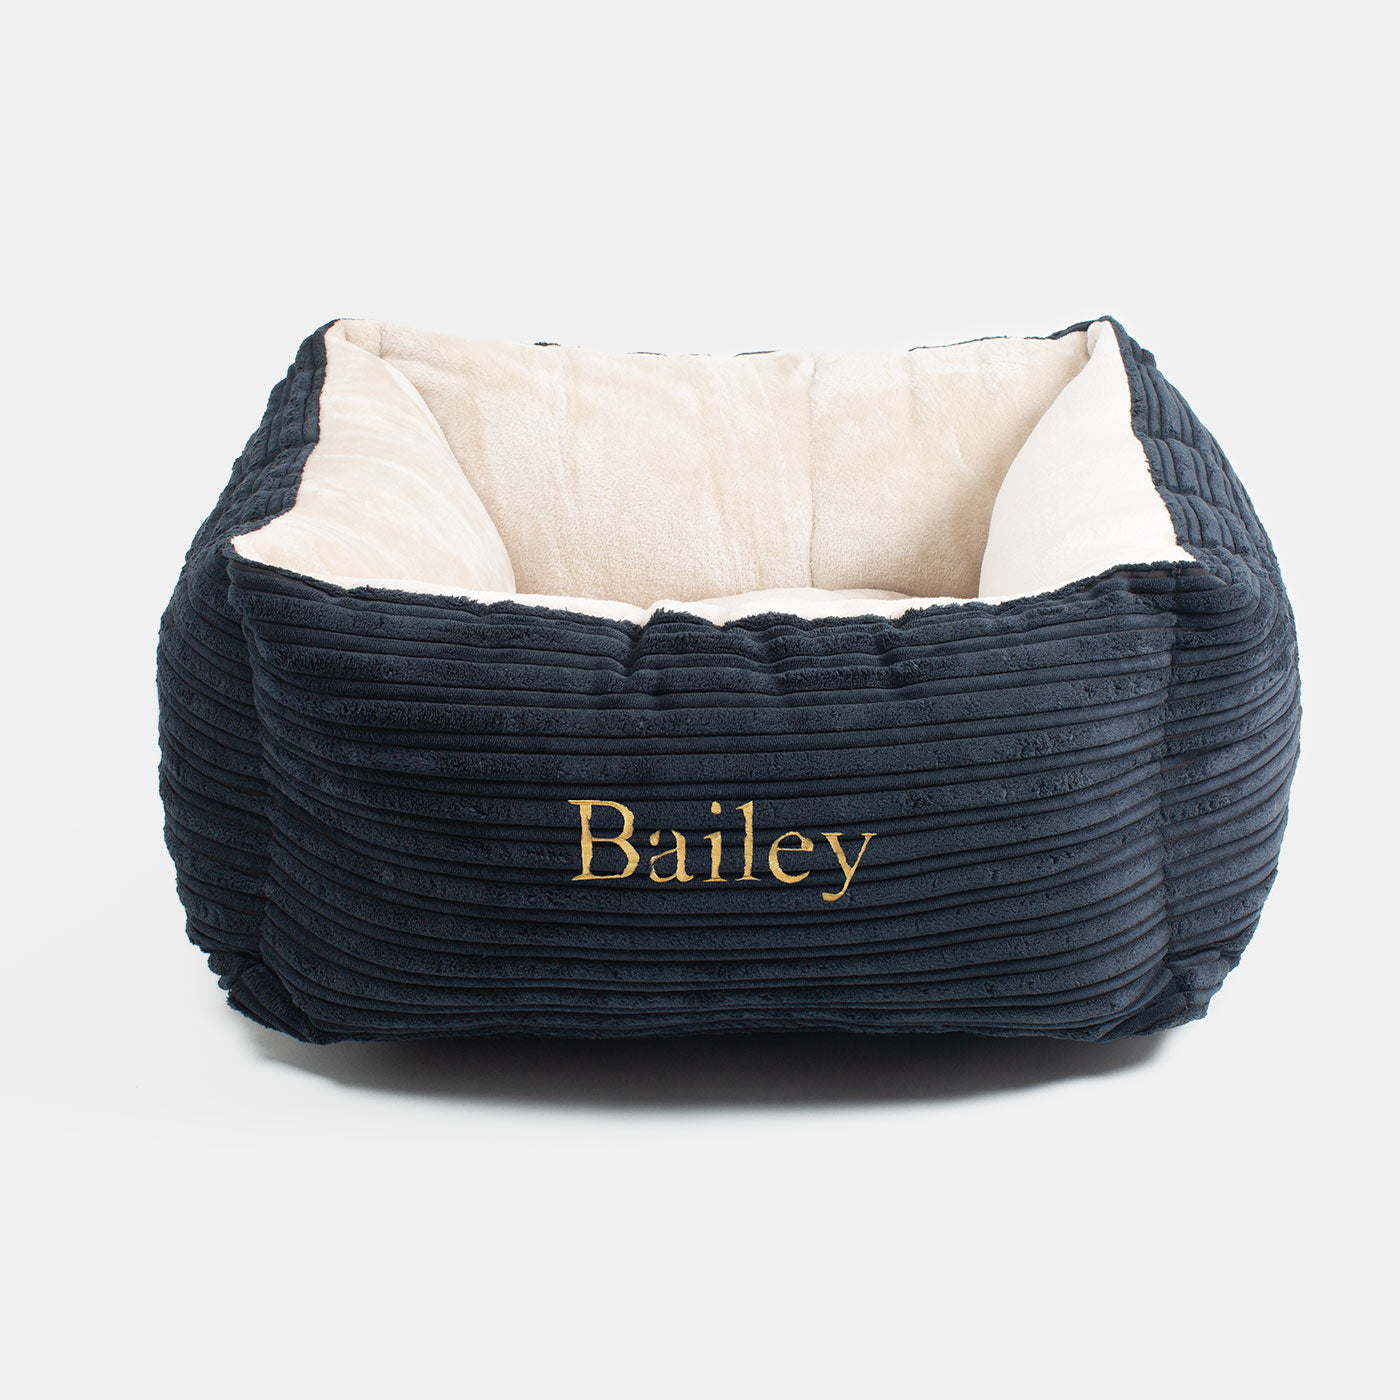 Super Soft, Plush Fabric Essentials Box Bed For Dogs, A Luxury Dog Bed Made Using Sherpa/Fleece To Bring The Perfect Pet Bed For The Ultimate Nap Time! Available Now at Lords & Labradors US